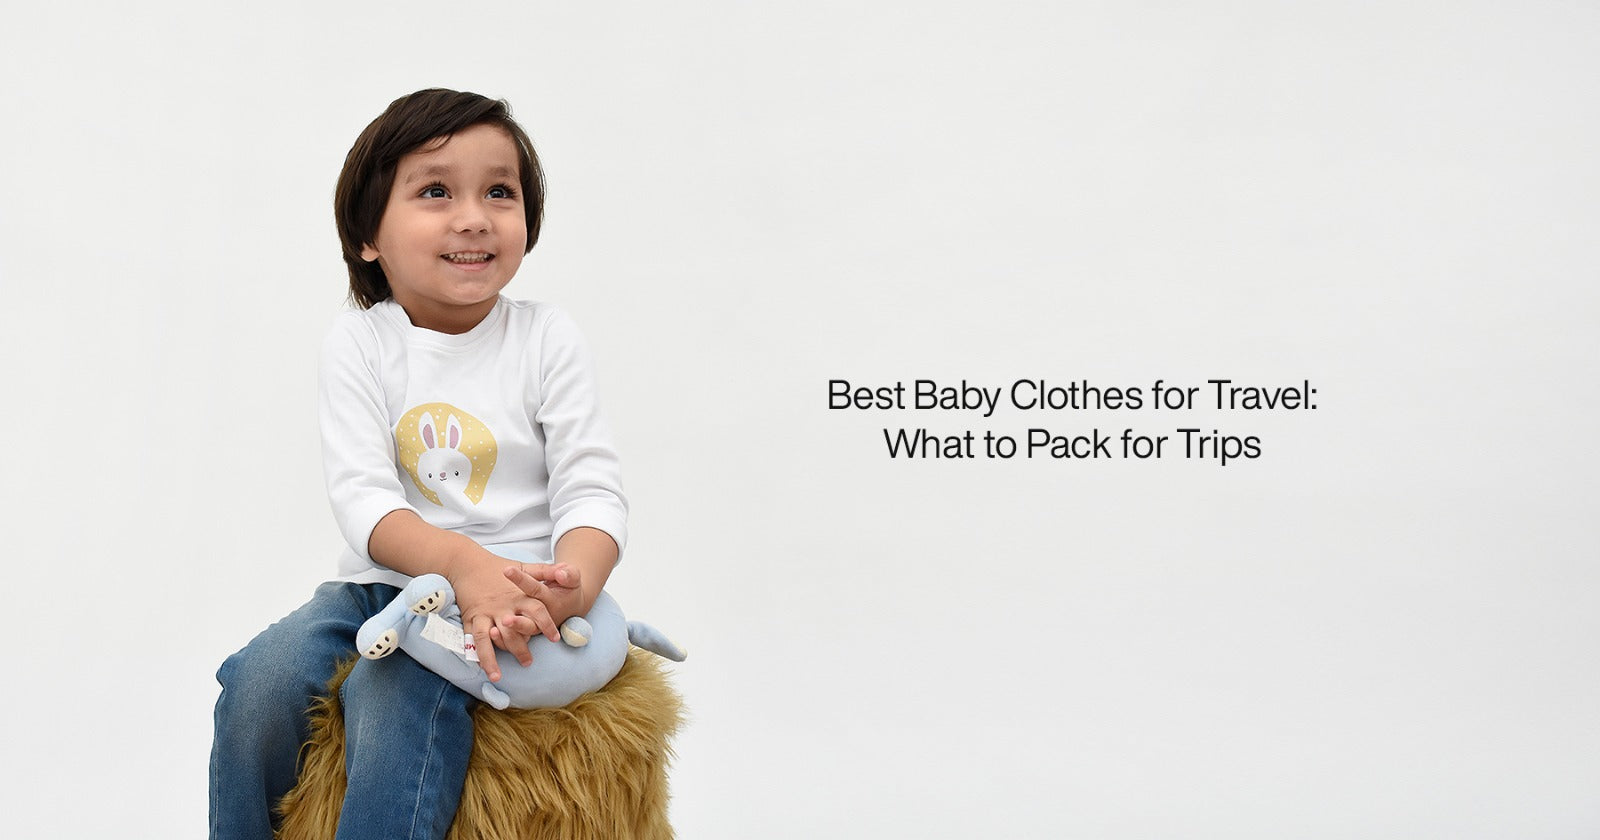 Best Baby Clothes for Travel: What to Pack for Trips